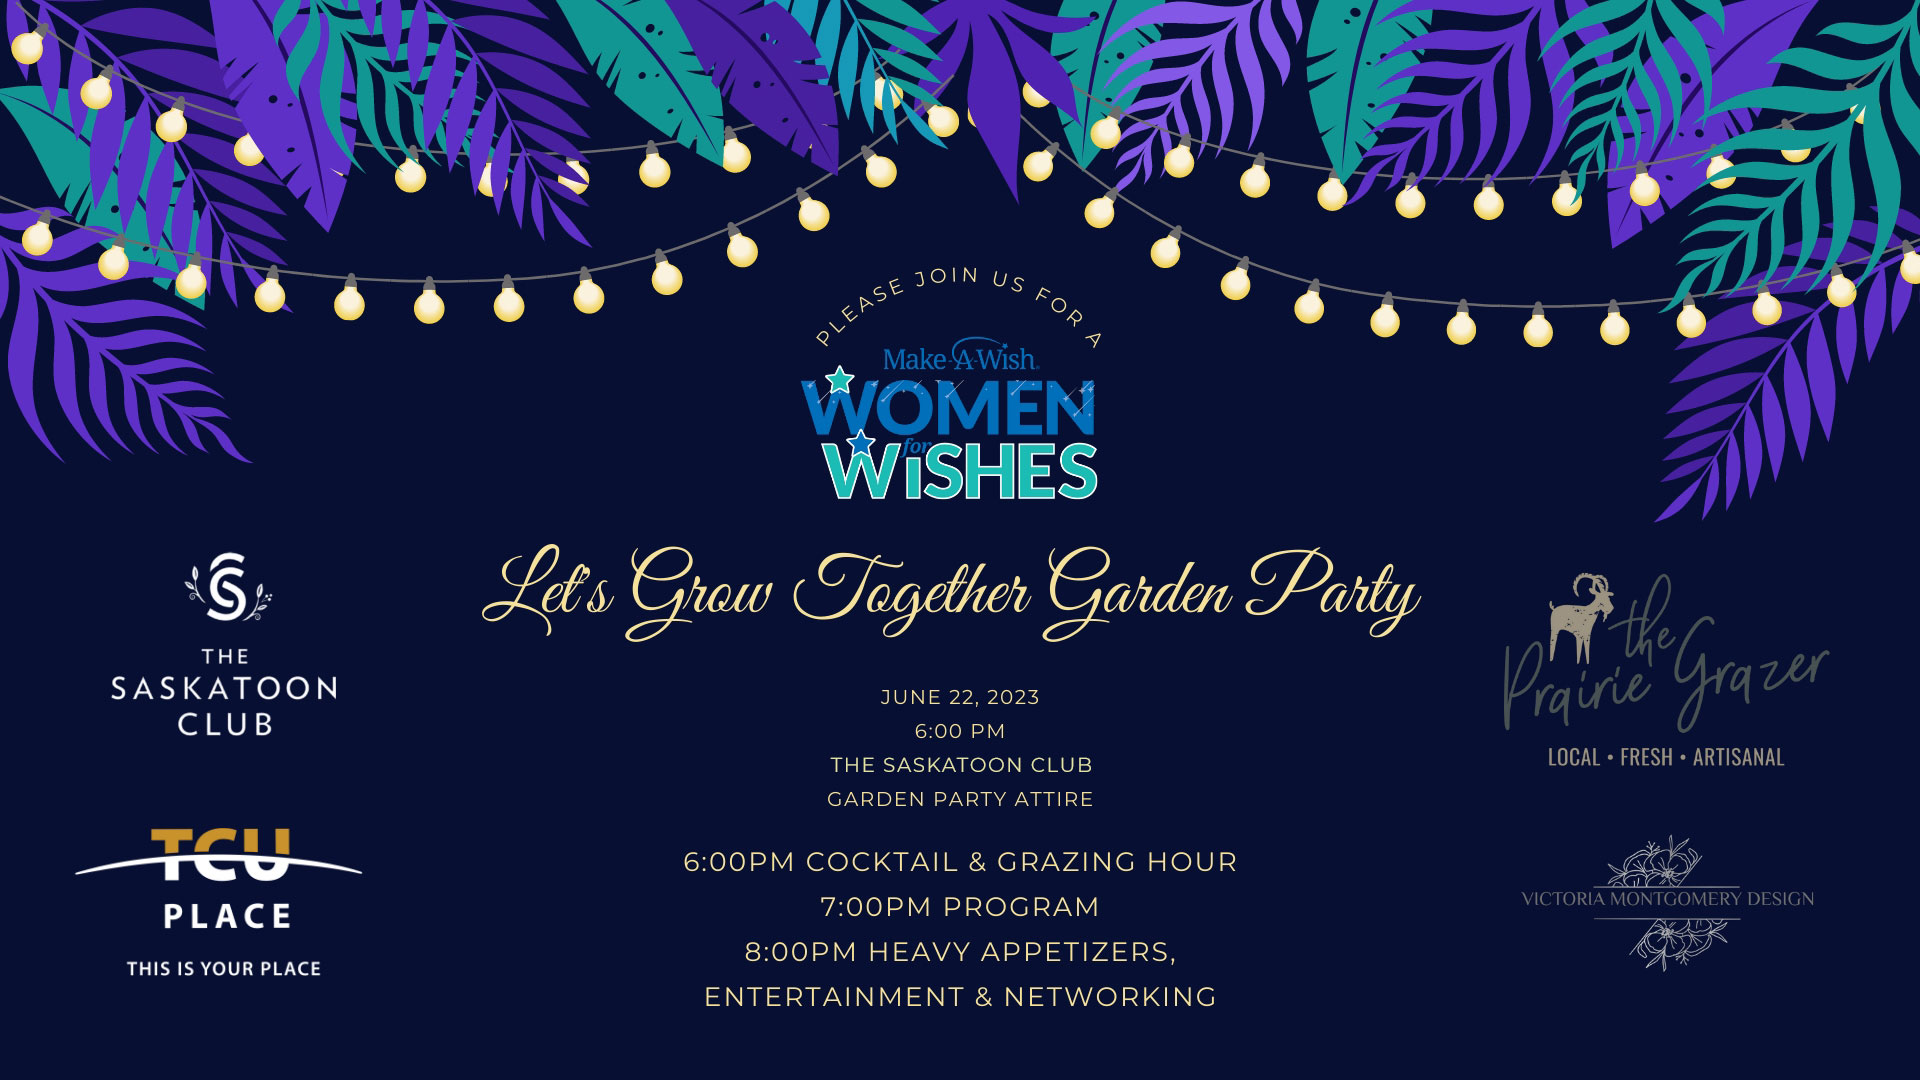 Make A Wish Foundation - Let's Grow Together Garden Party - June 22nd at Saskatoon Club